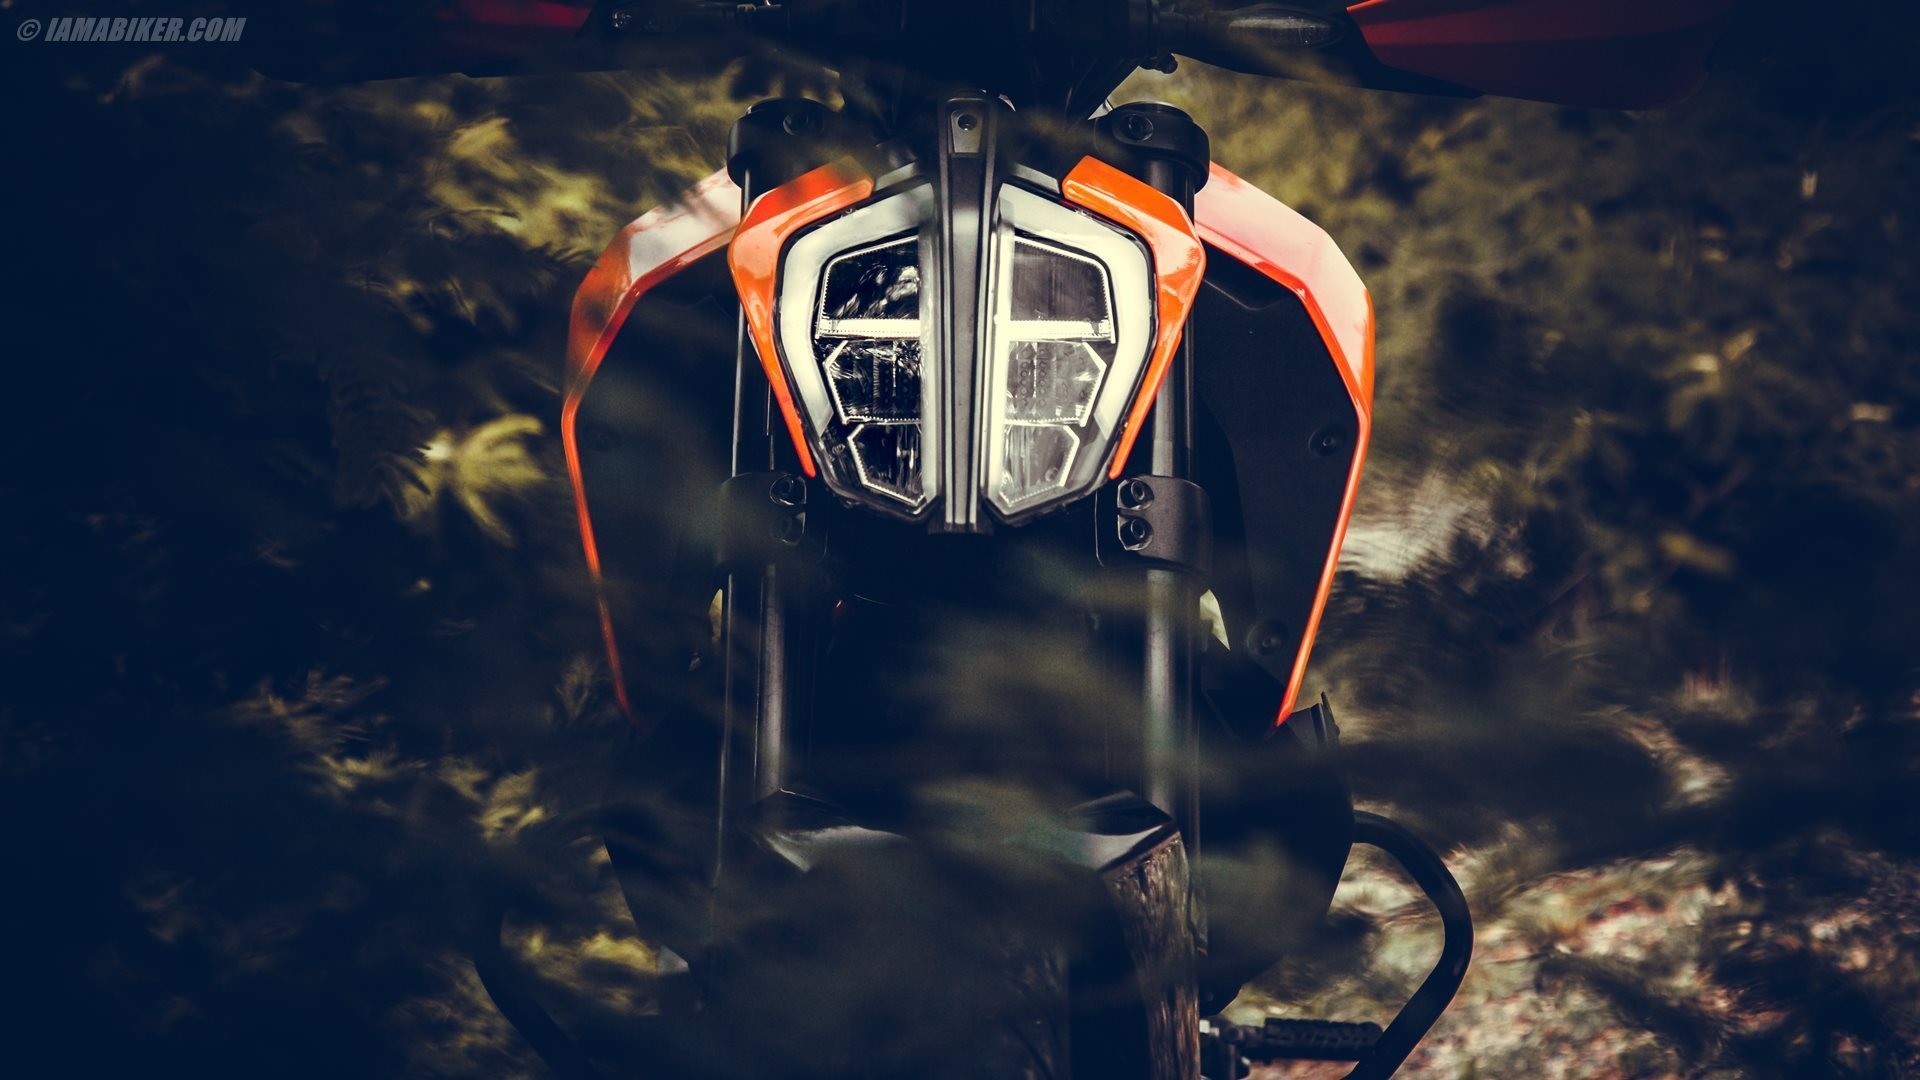 1920x1080 Also check out great recommendations and products to customise your KTM ...